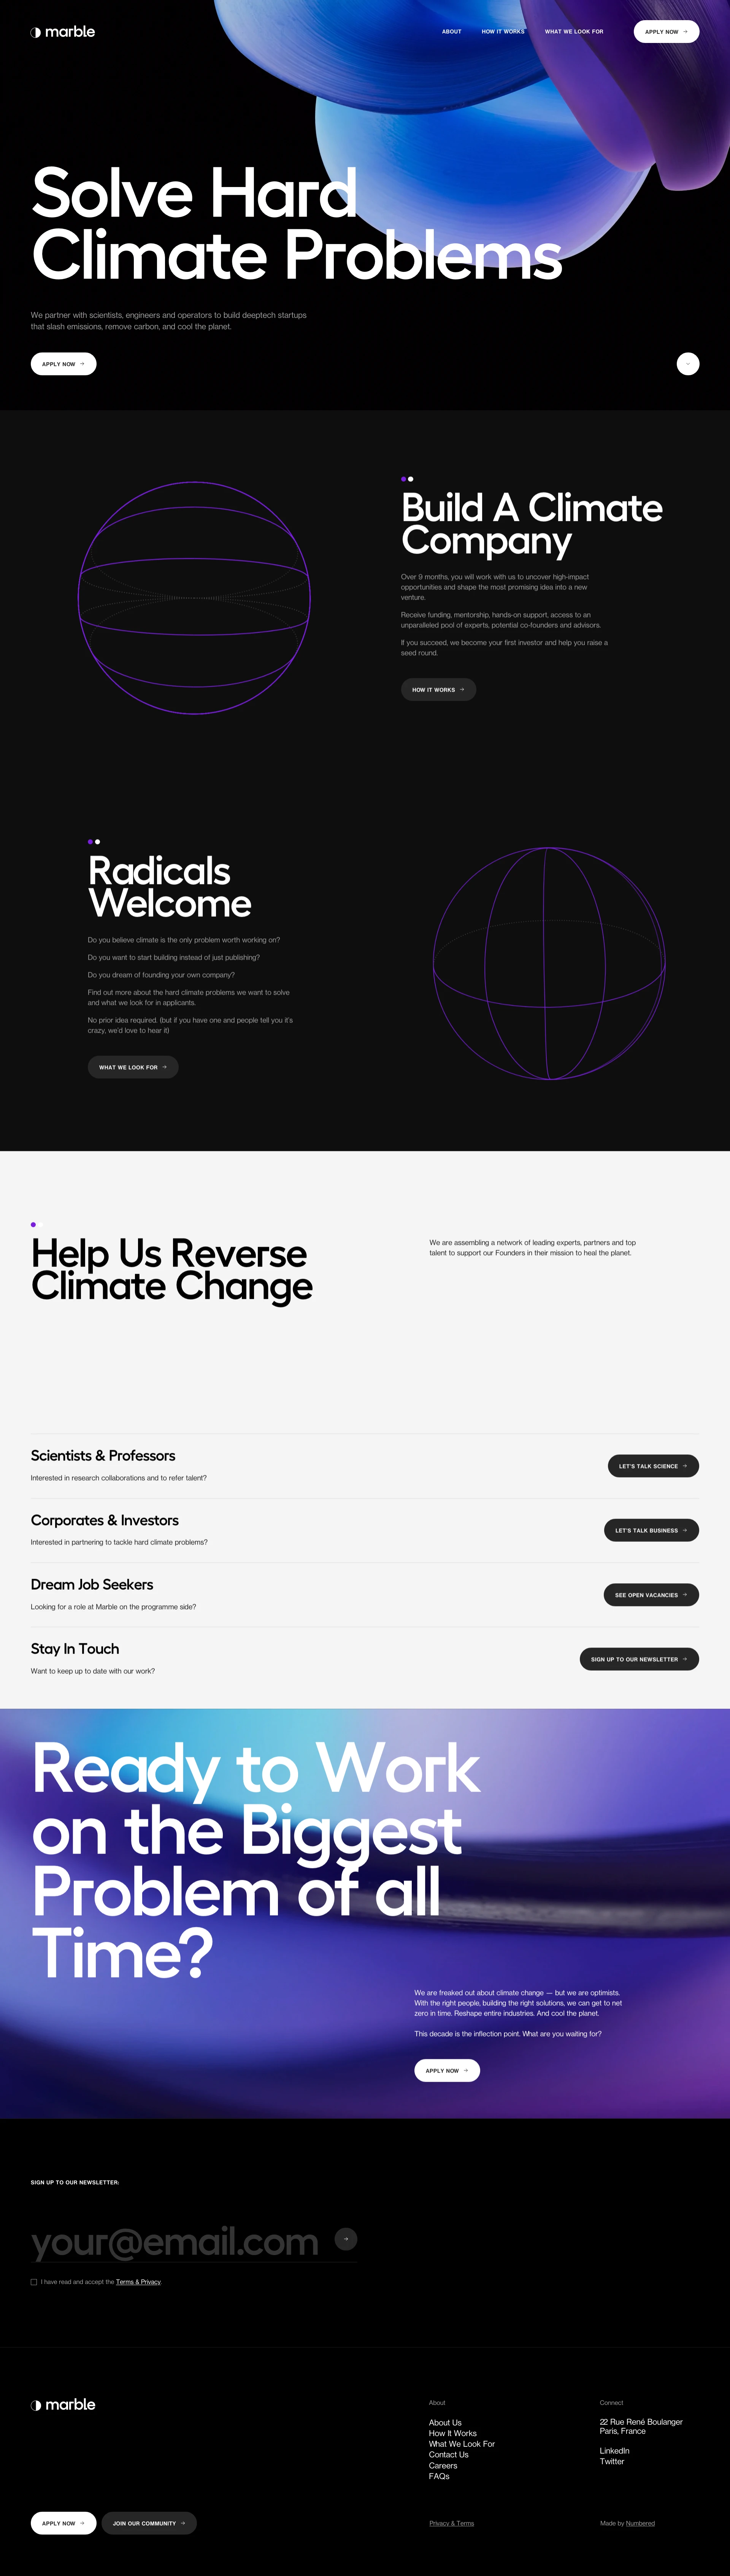 Marble Landing Page Example: We partner with scientists, engineers and operators to build deeptech startups that slash emissions, remove carbon, and cool the planet.